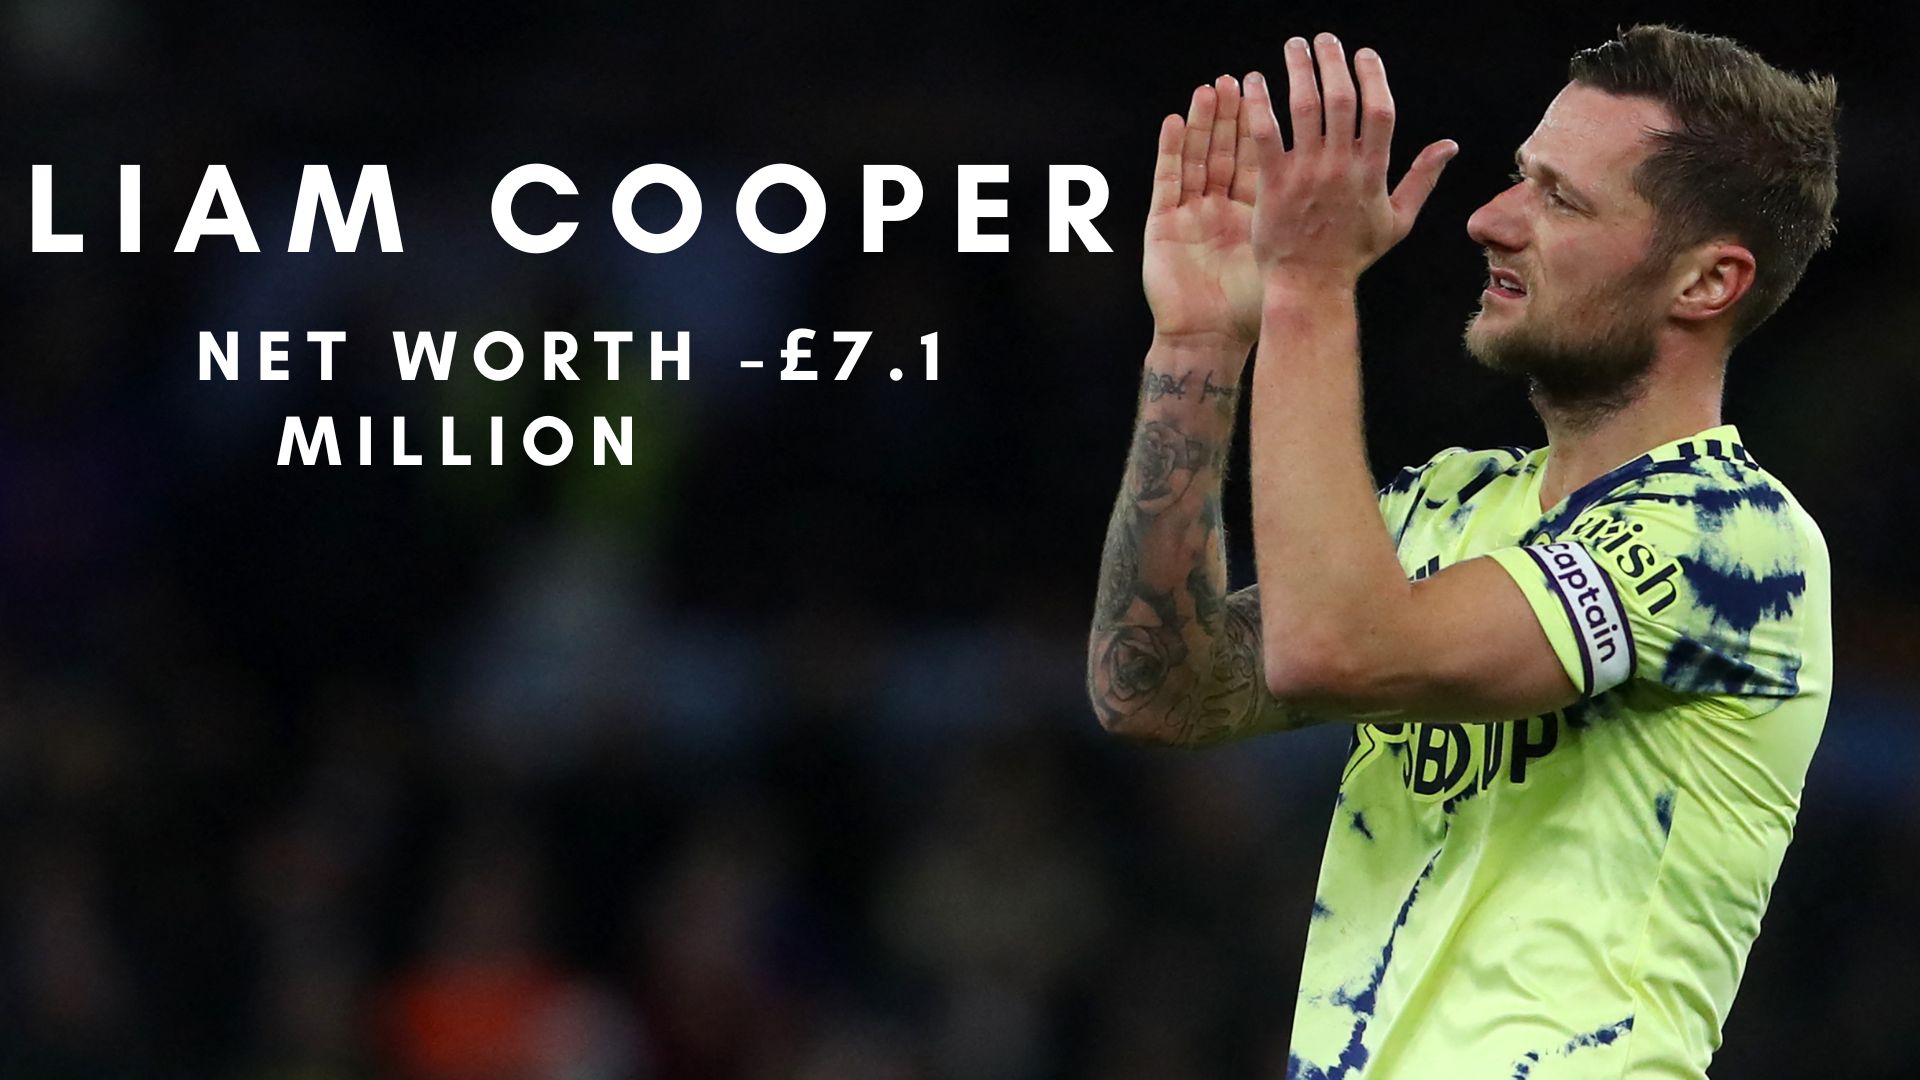 Liam Cooper – Net Worth, Girlfriend, Salary, Sponsors, Tattoos, Cars, and more